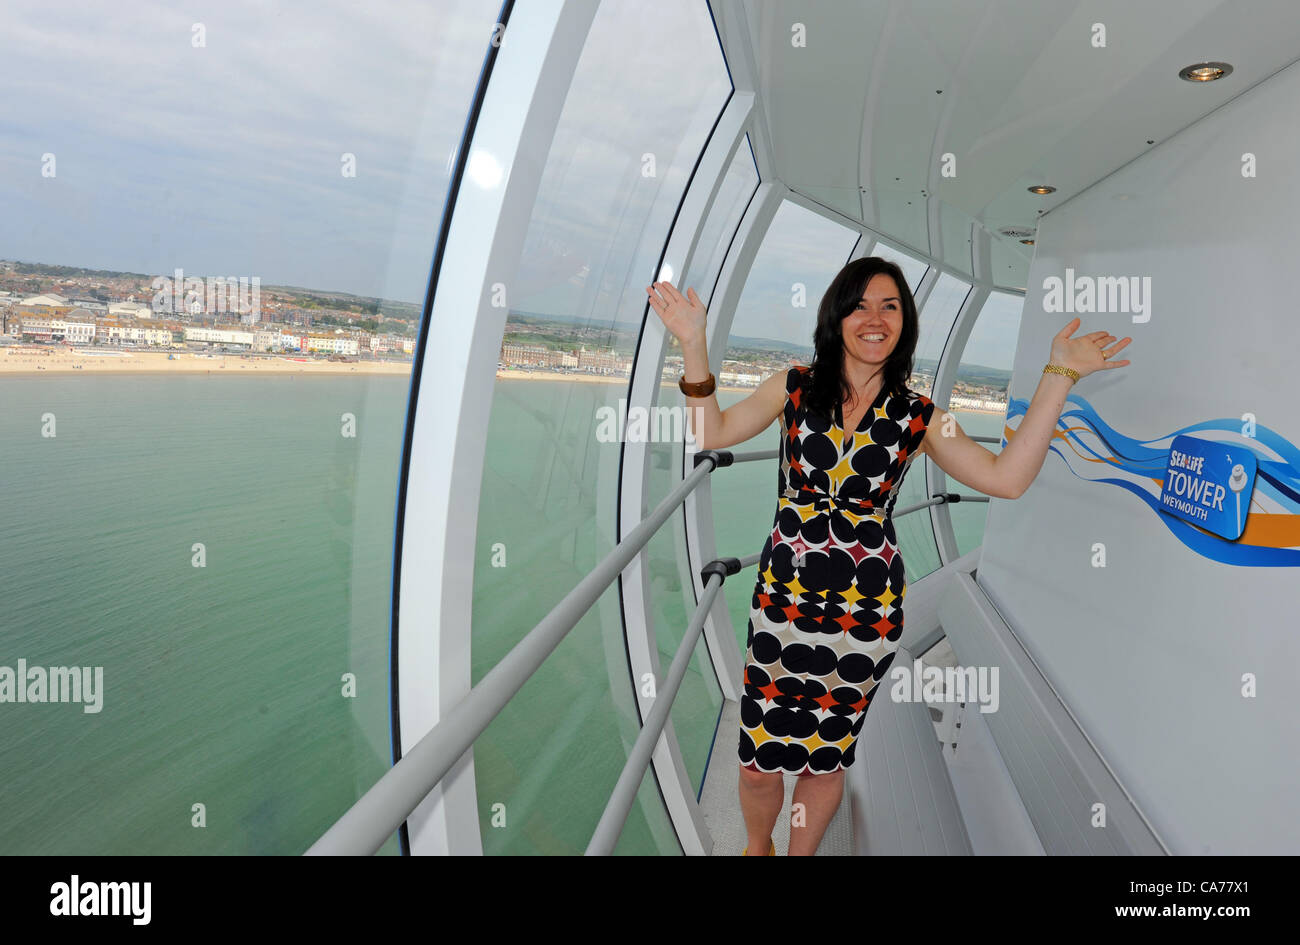 Official opening of the Sea Life Tower in the 2012 Olympic Sailing venue, Weymouth, Dorset, Britain. It is operated by the Merlin Entertainments Group. Marketing Manager for the tower Raquel Cubillo. 20/06/2012 PICTURE BY: DORSET MEDIA SERVICE Stock Photo